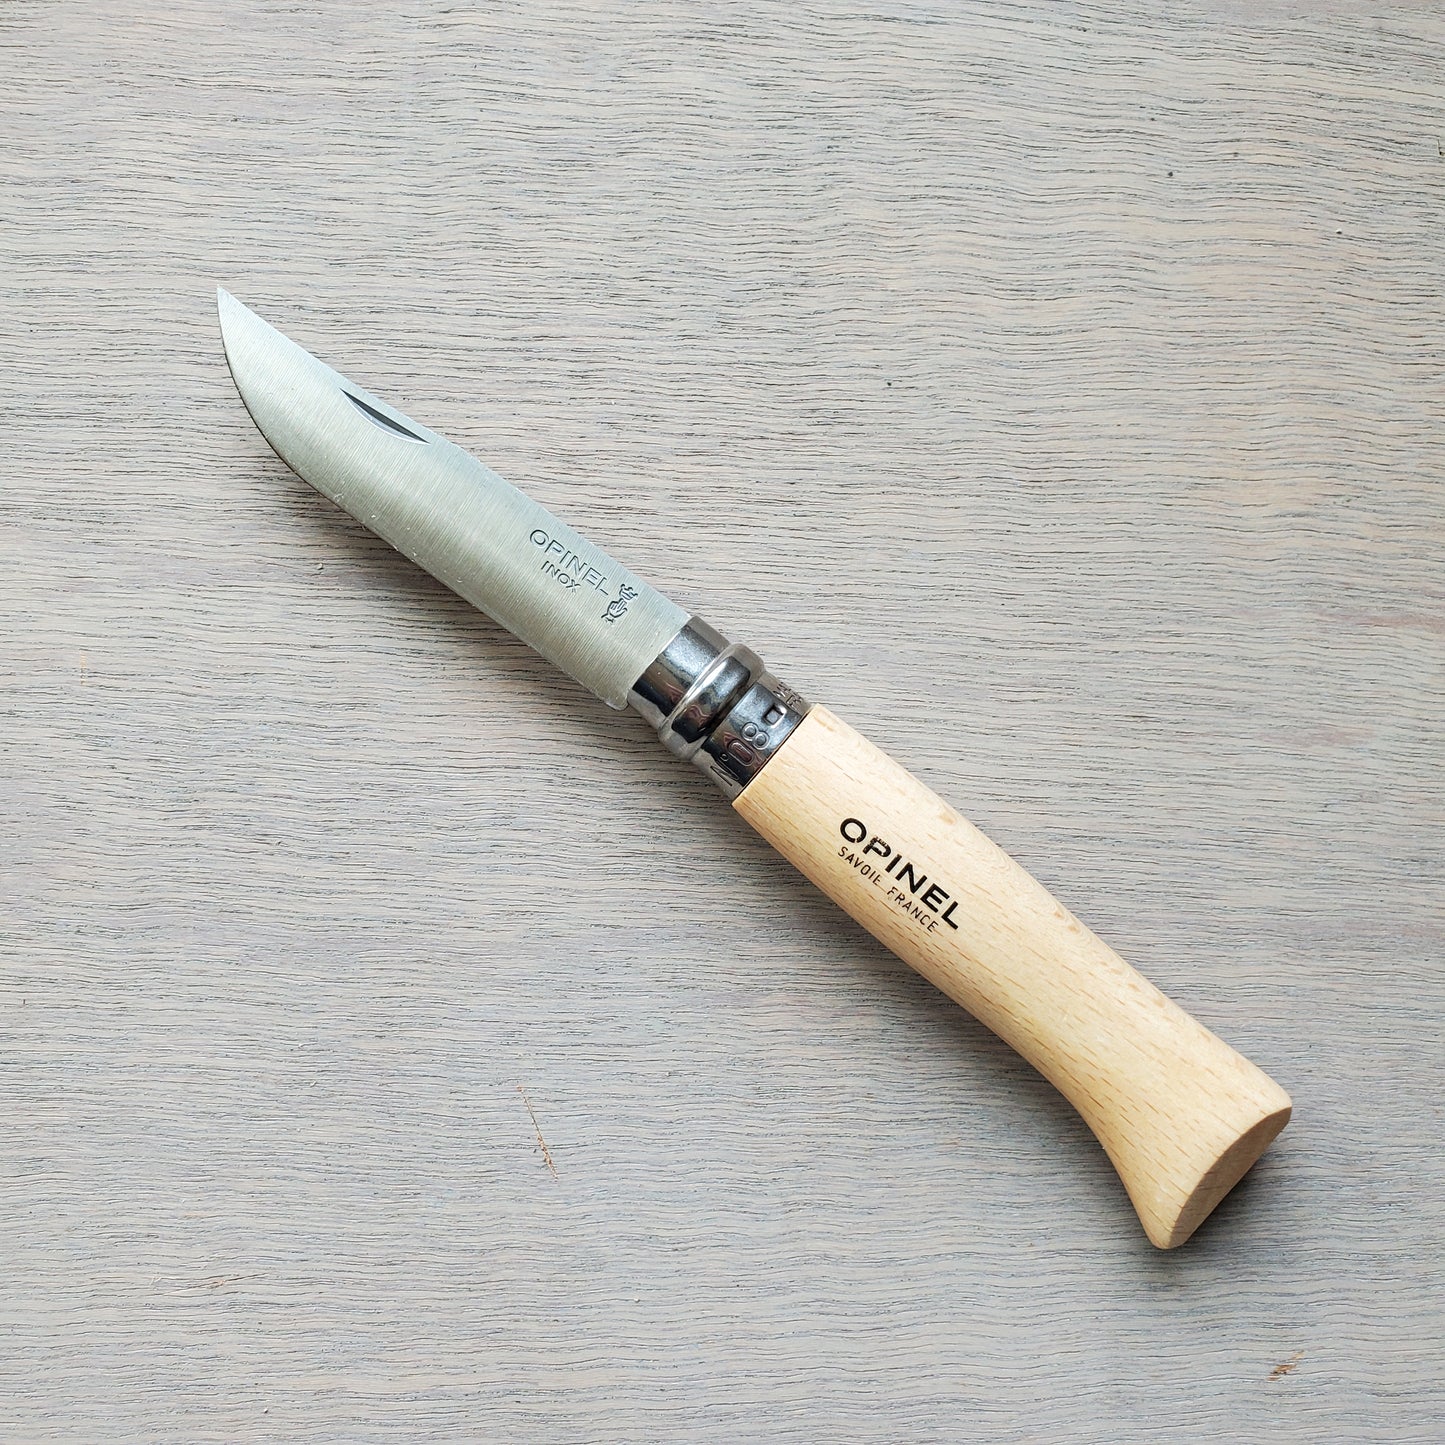 Opinel No.8 Stainless Folding Knife